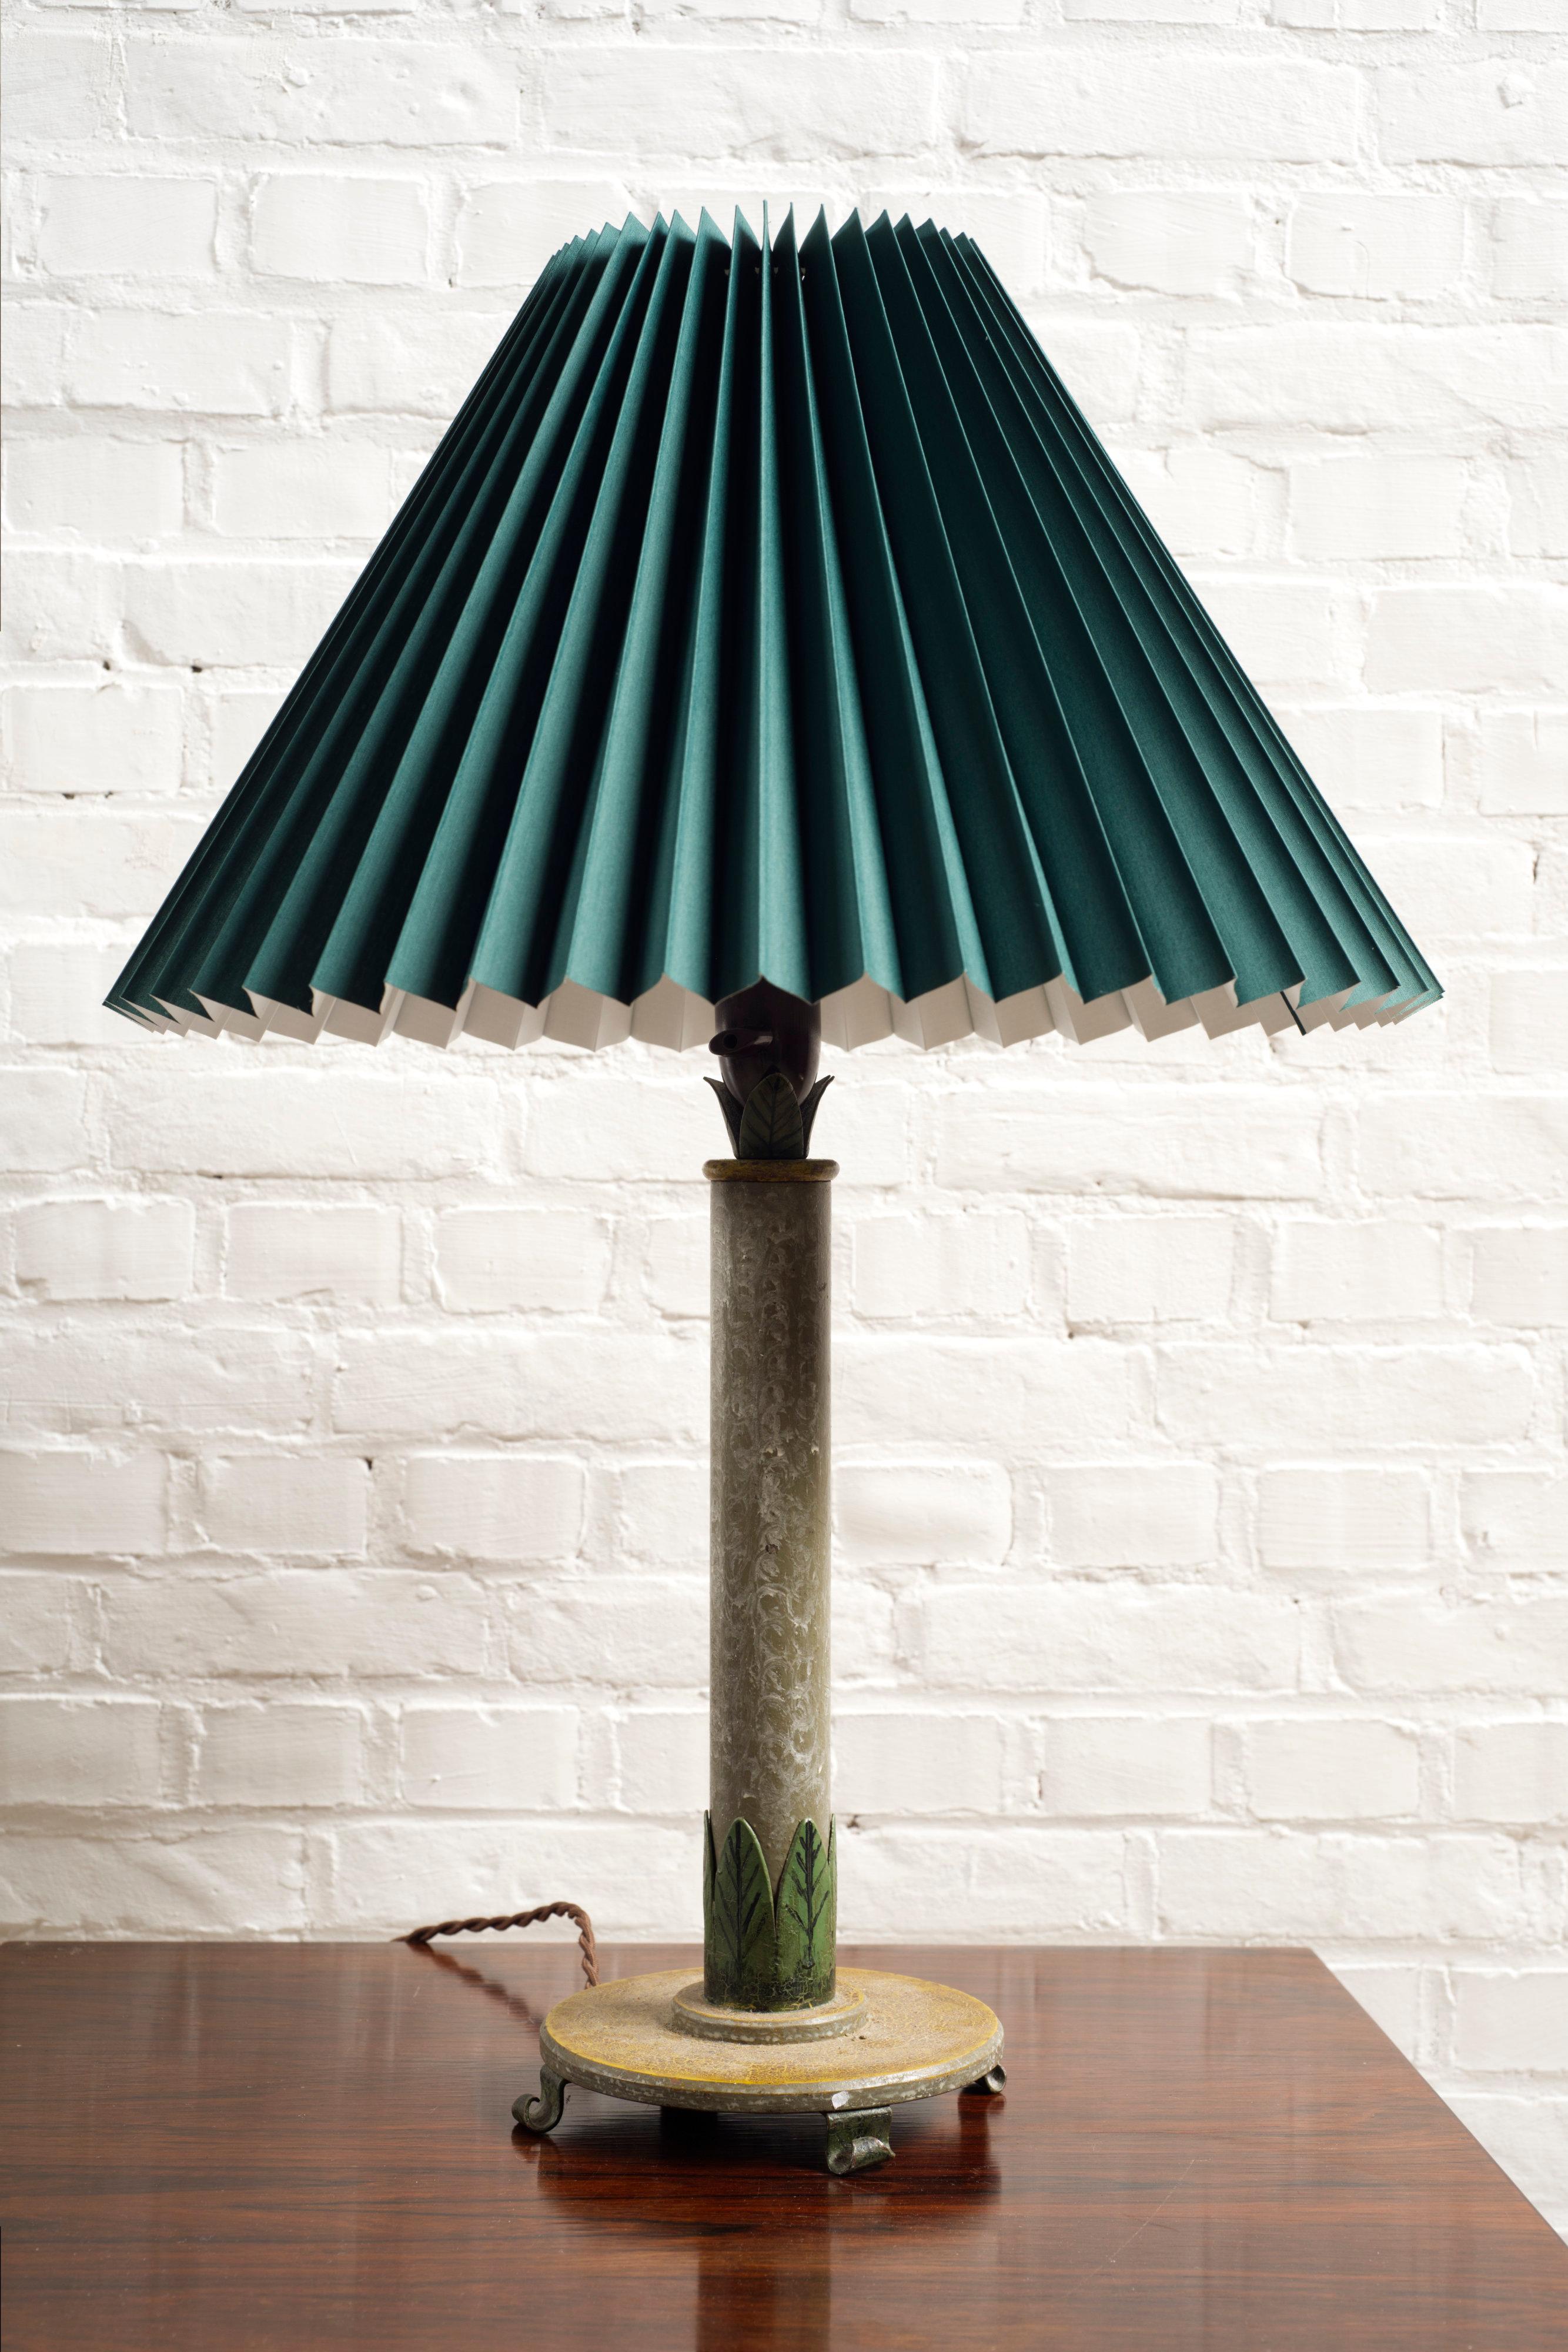 
A very unique cast iron table lamp with beautifully painted metal details. Handmade and painted leaf details and feet.

Inspired by art nouveau characteristic but understated in its elegance. 

Frame base 17cm wide, lampshade 44cm wide, height